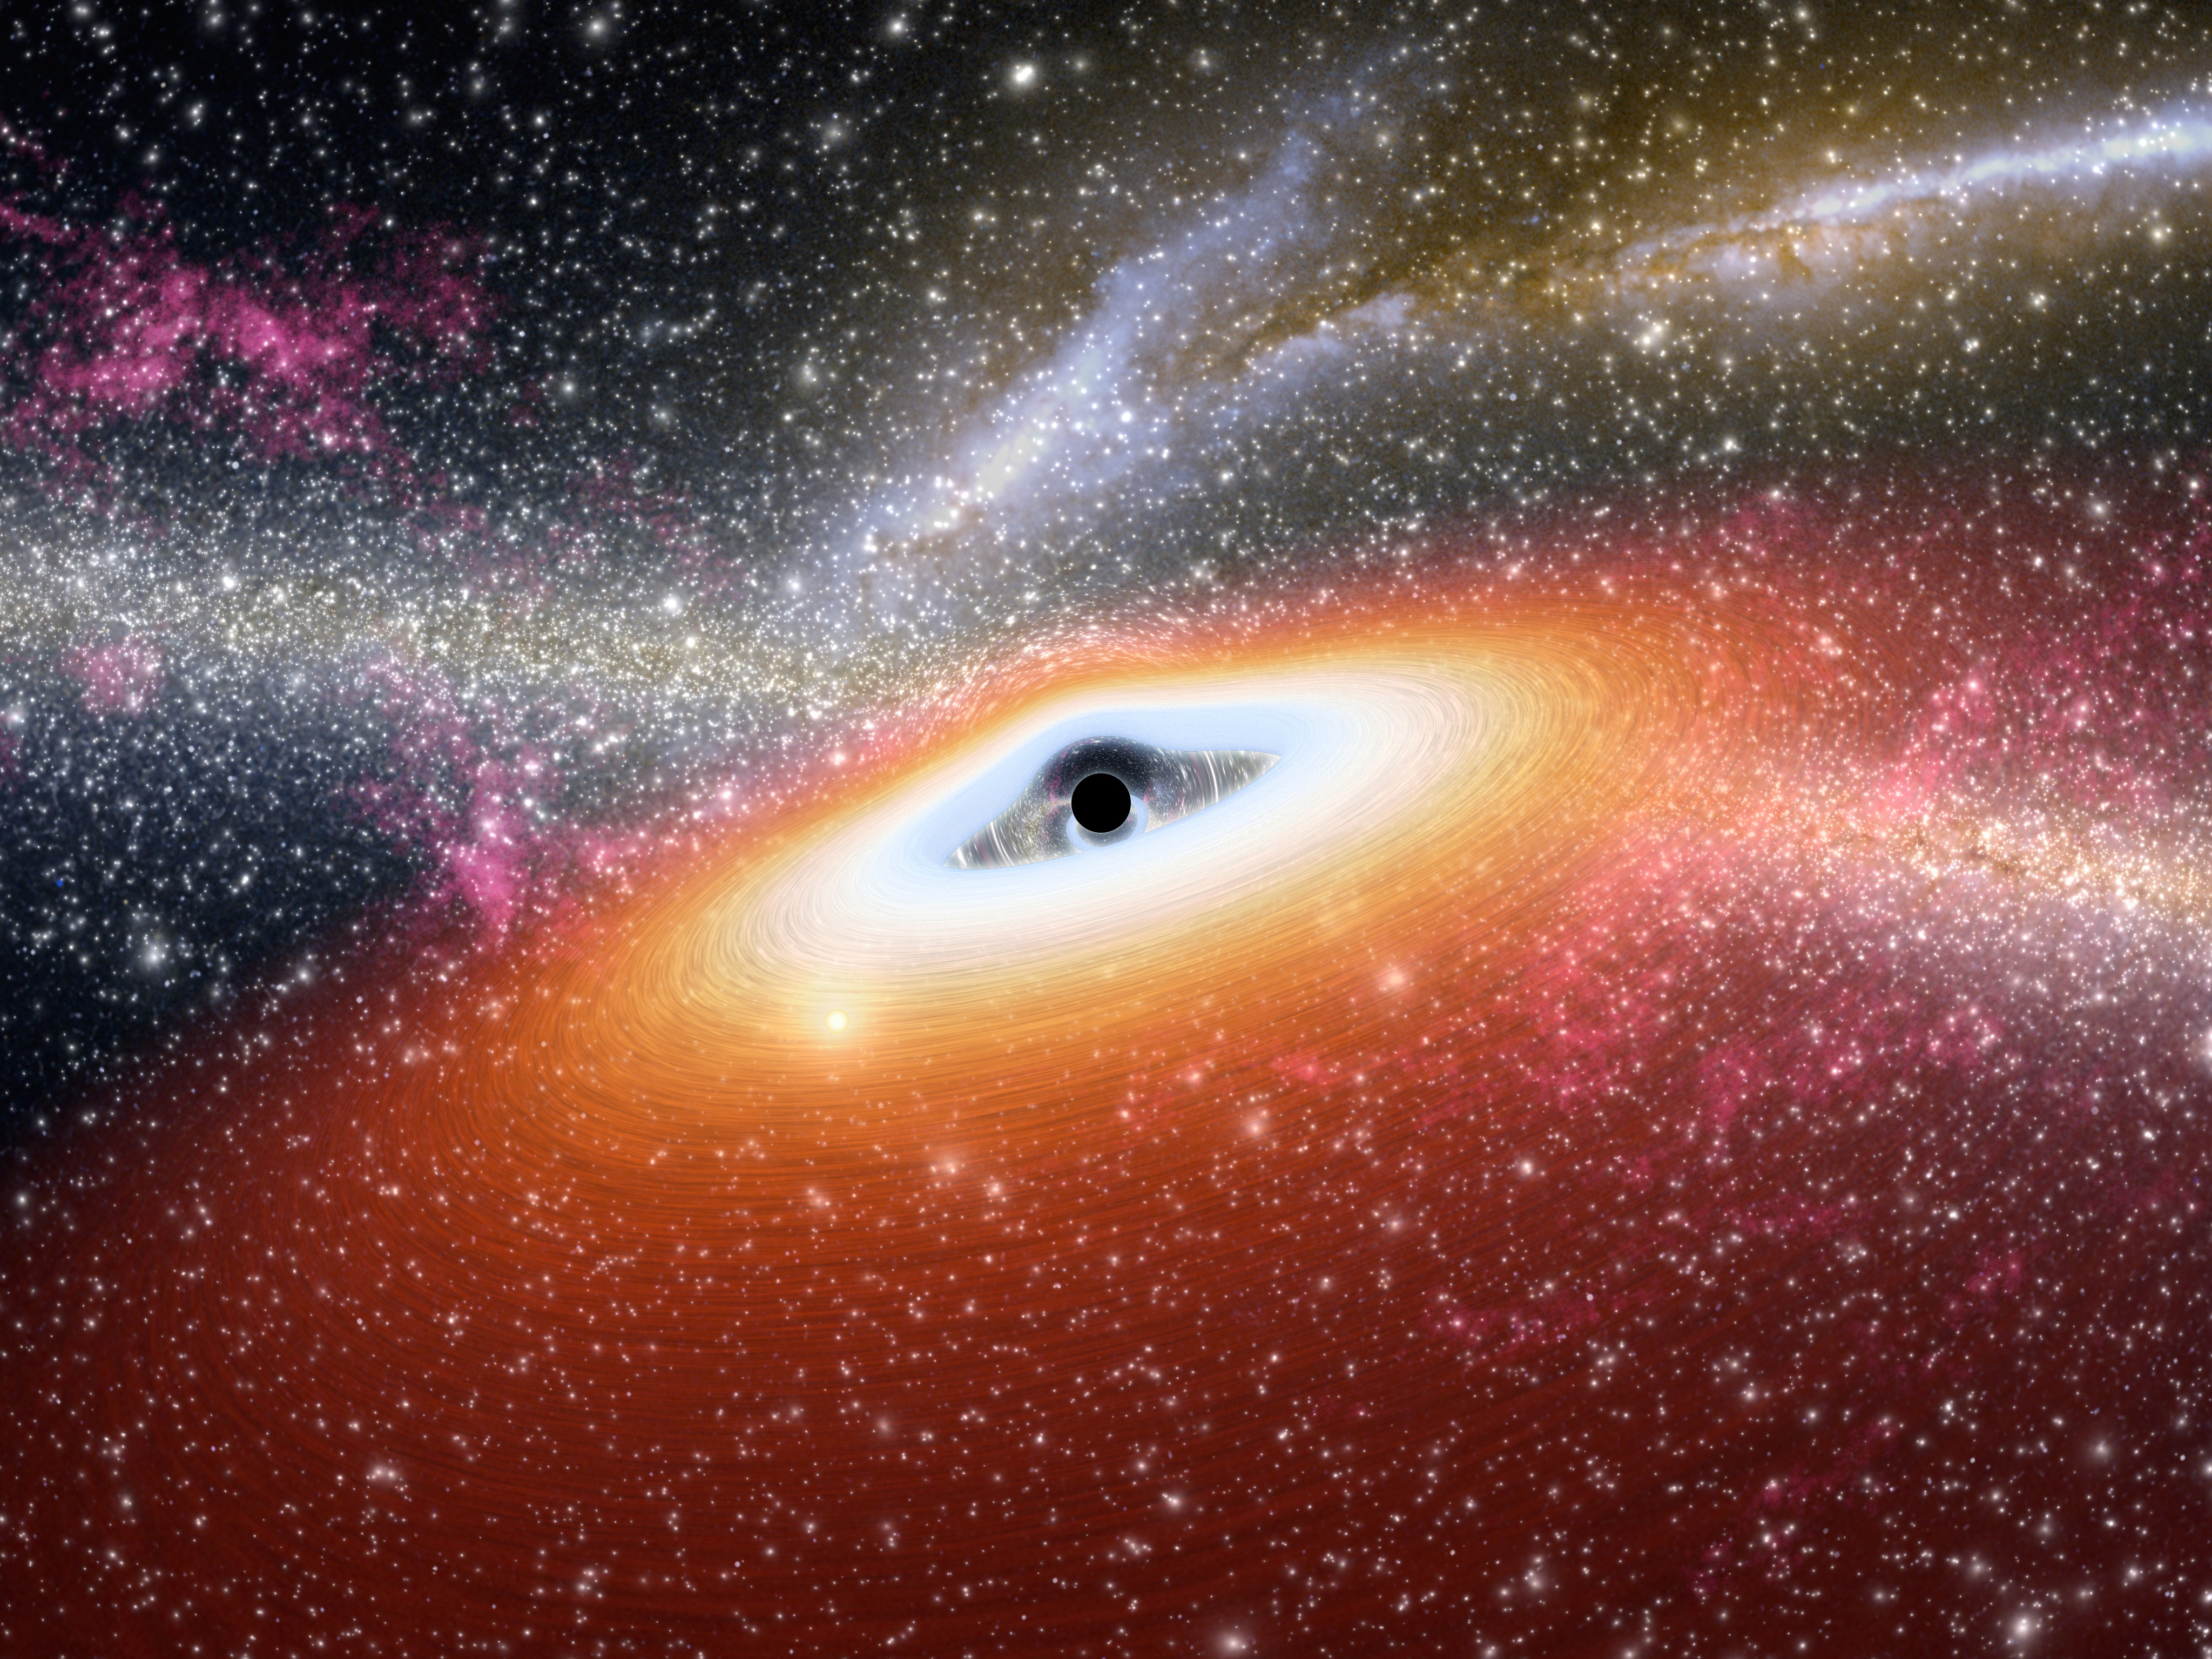 Black Hole Actual Images in Space